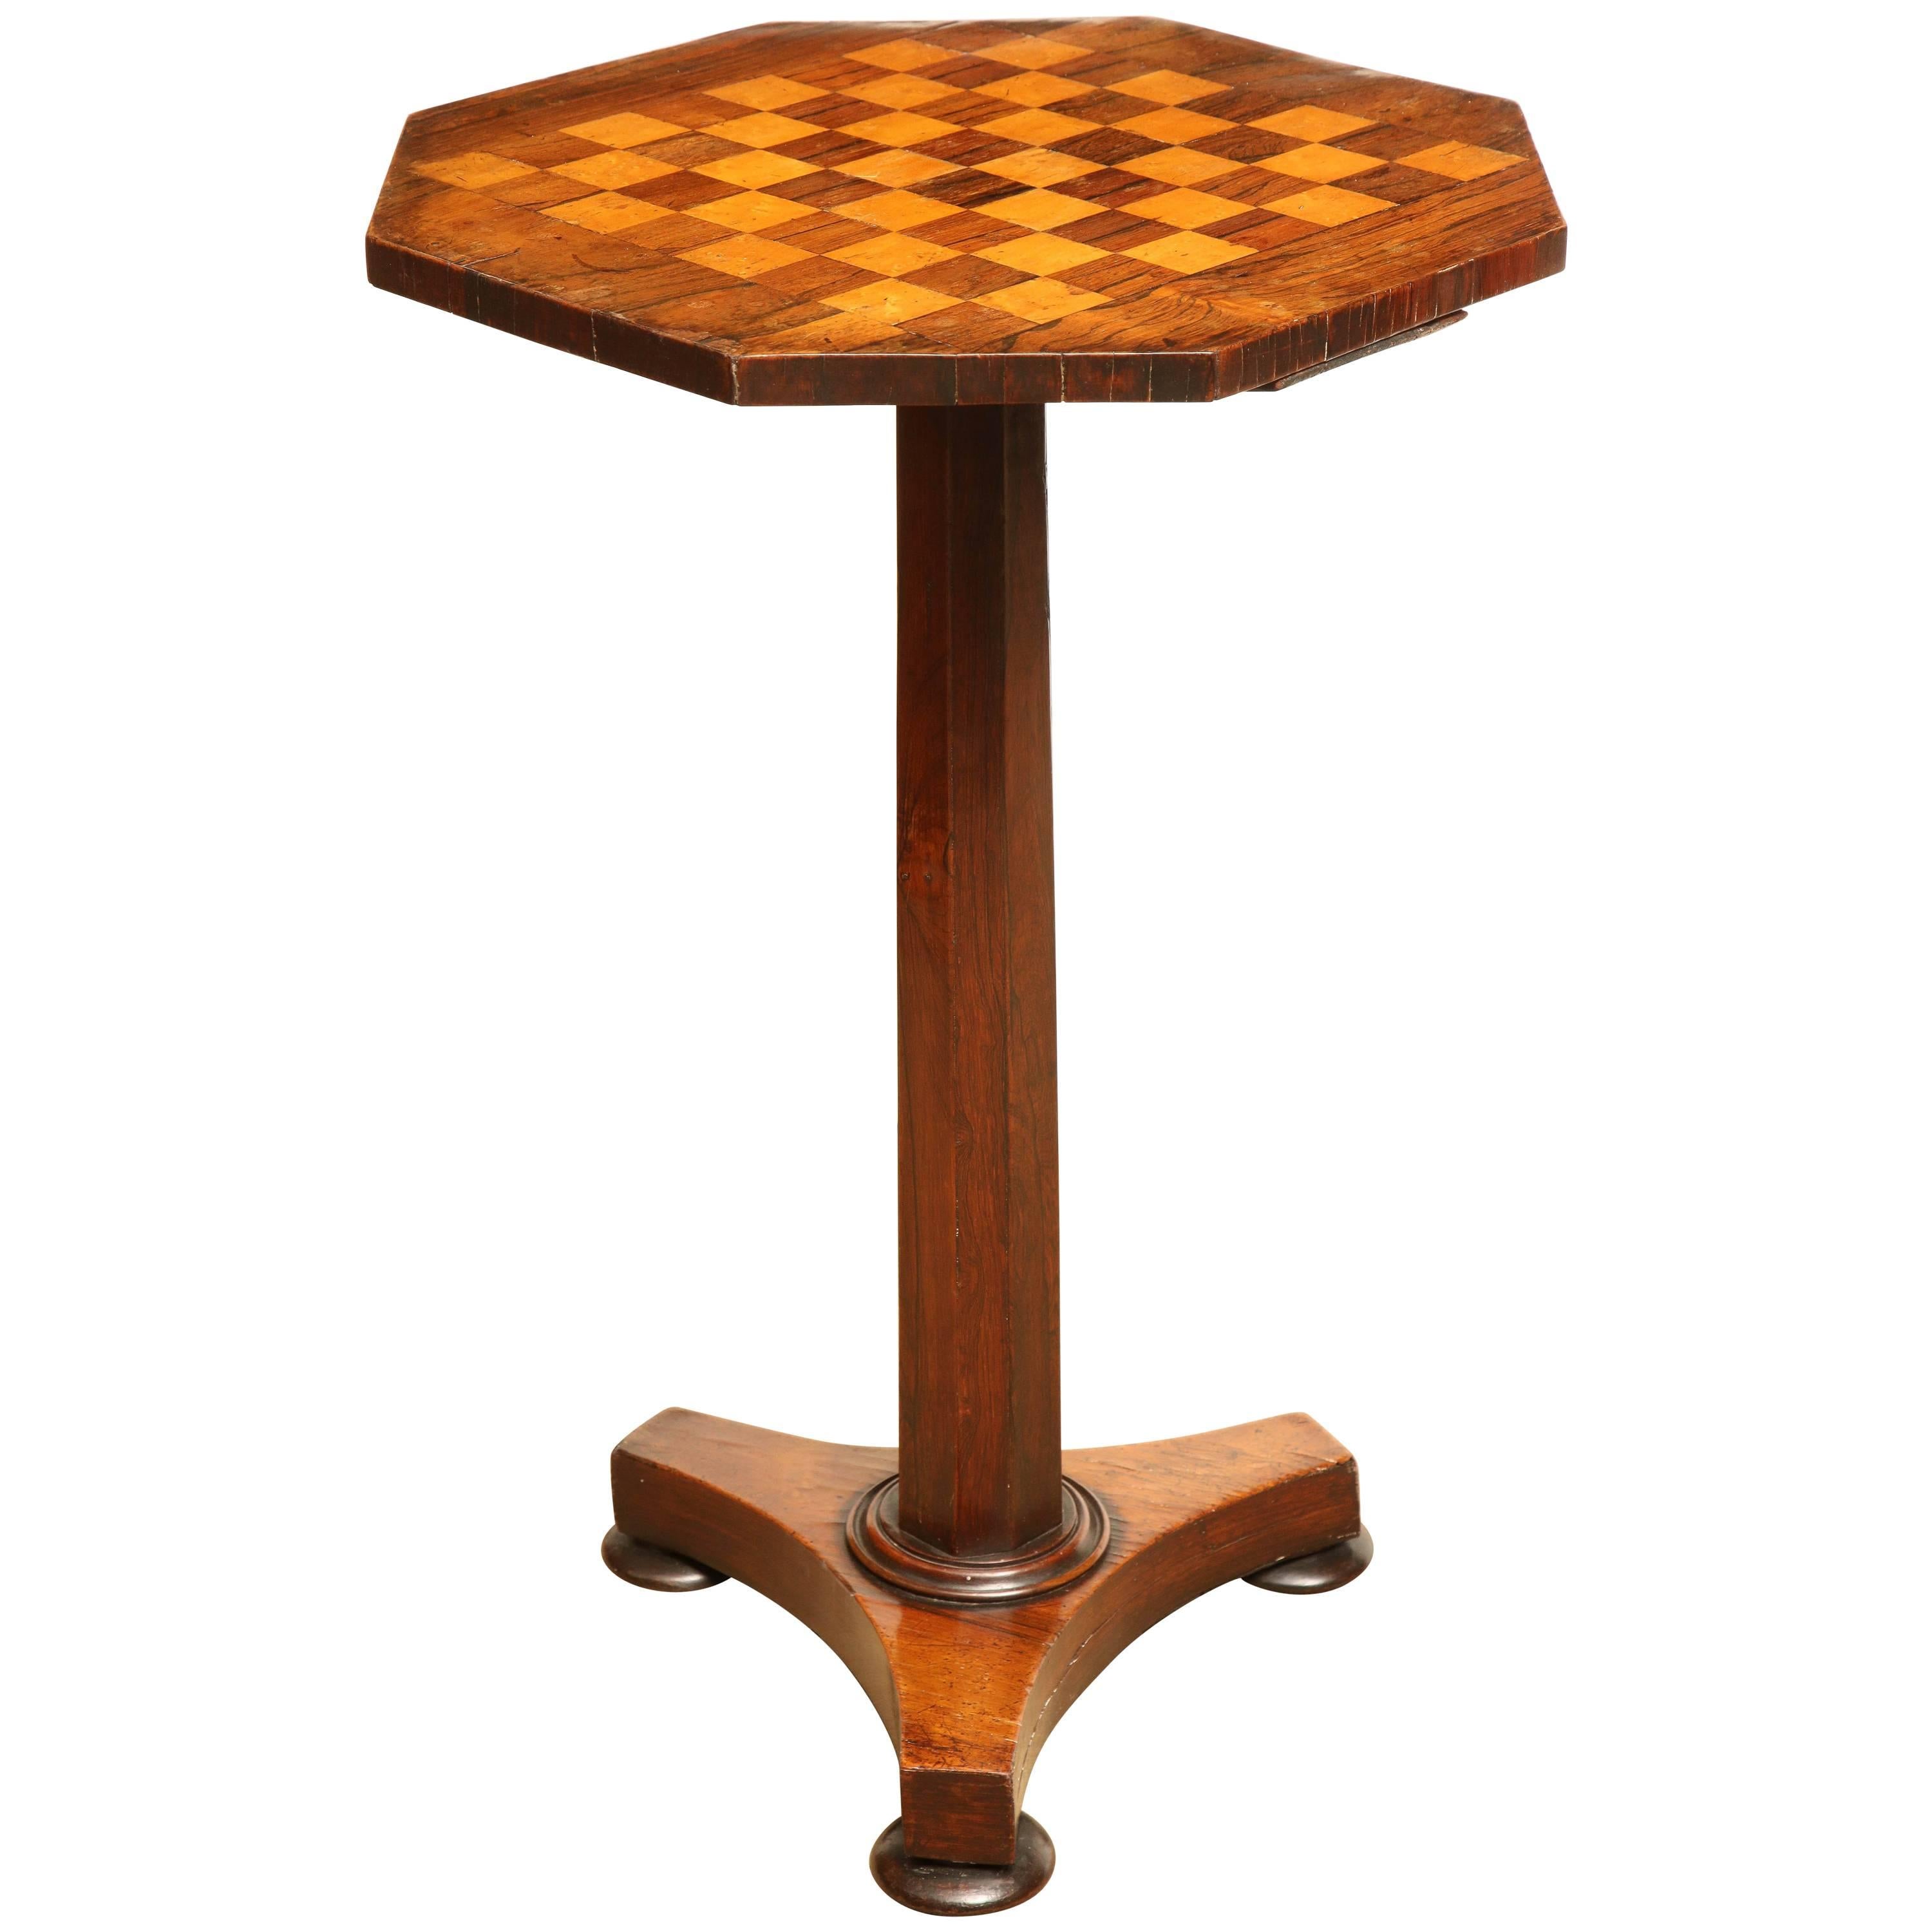 Mid-19th Century English Octagonal Table with Game Board Top